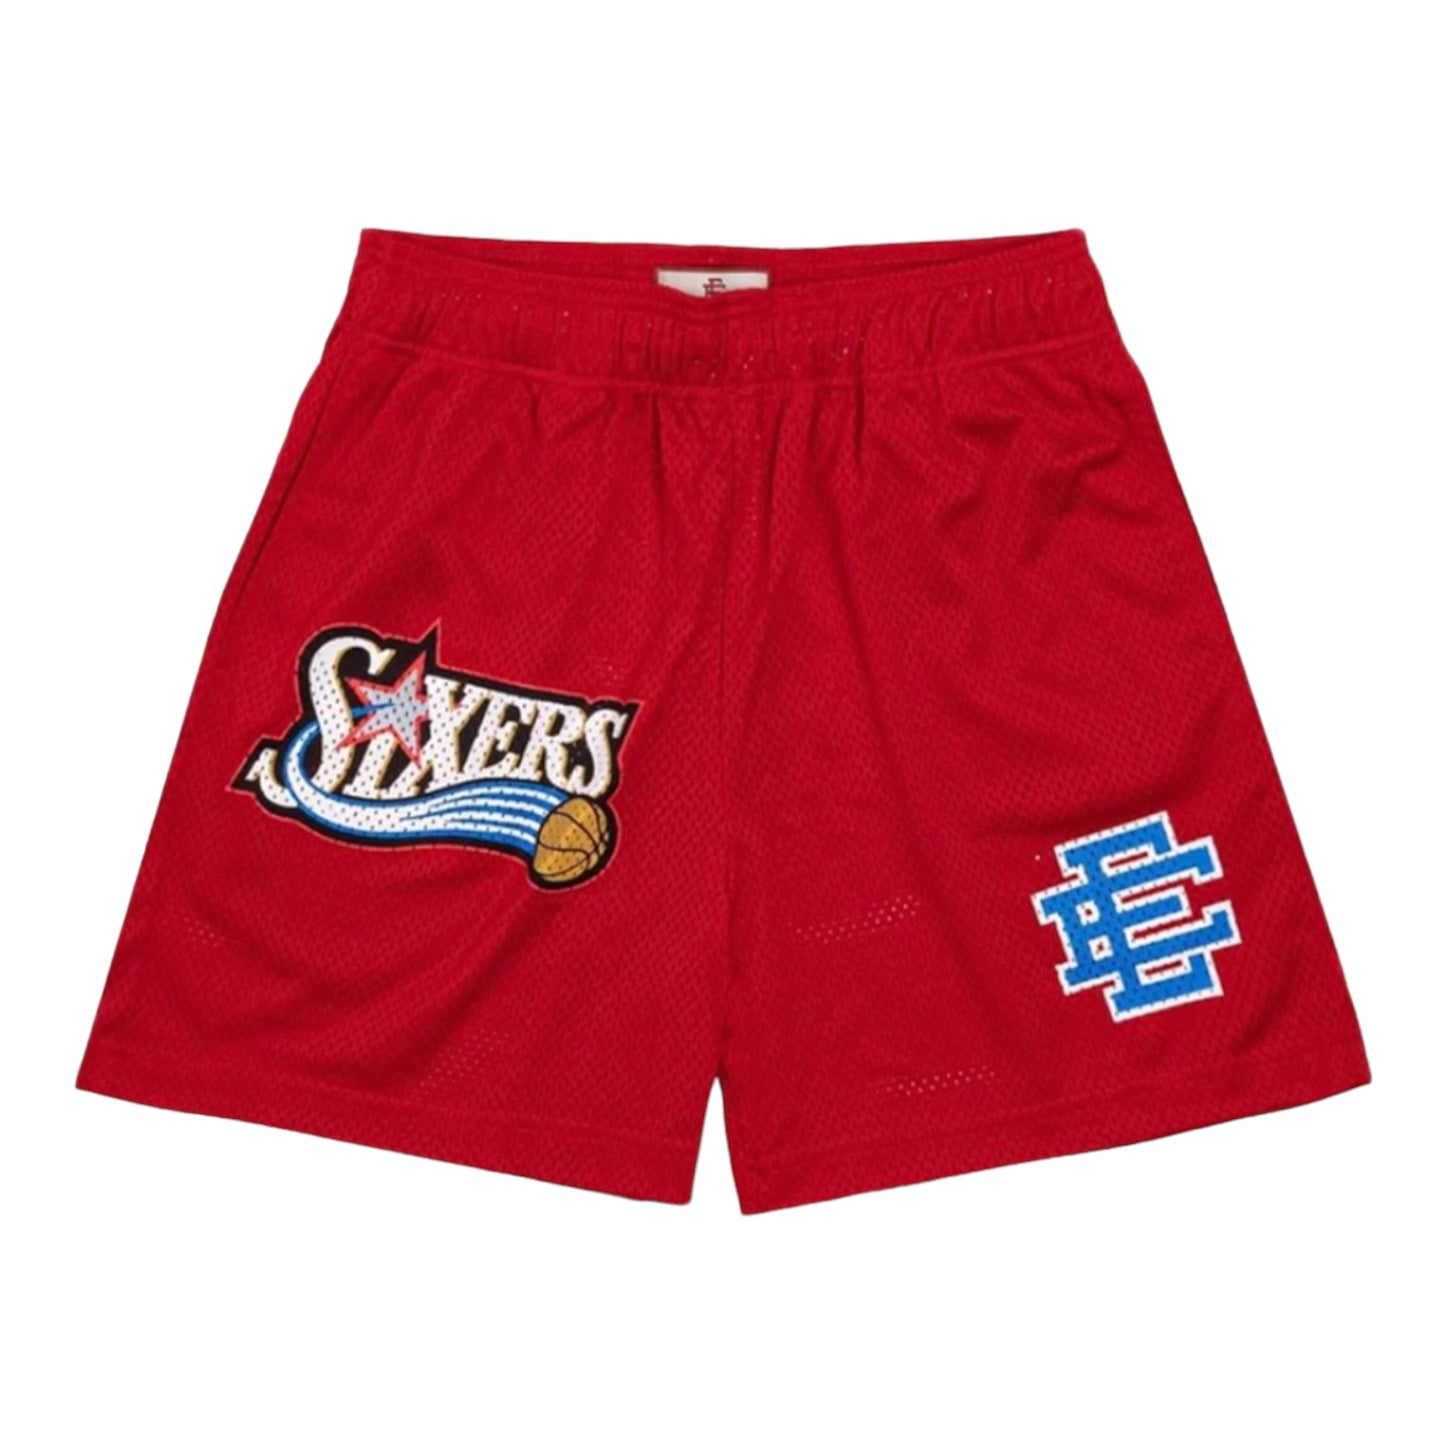 SIXERS SHORTS